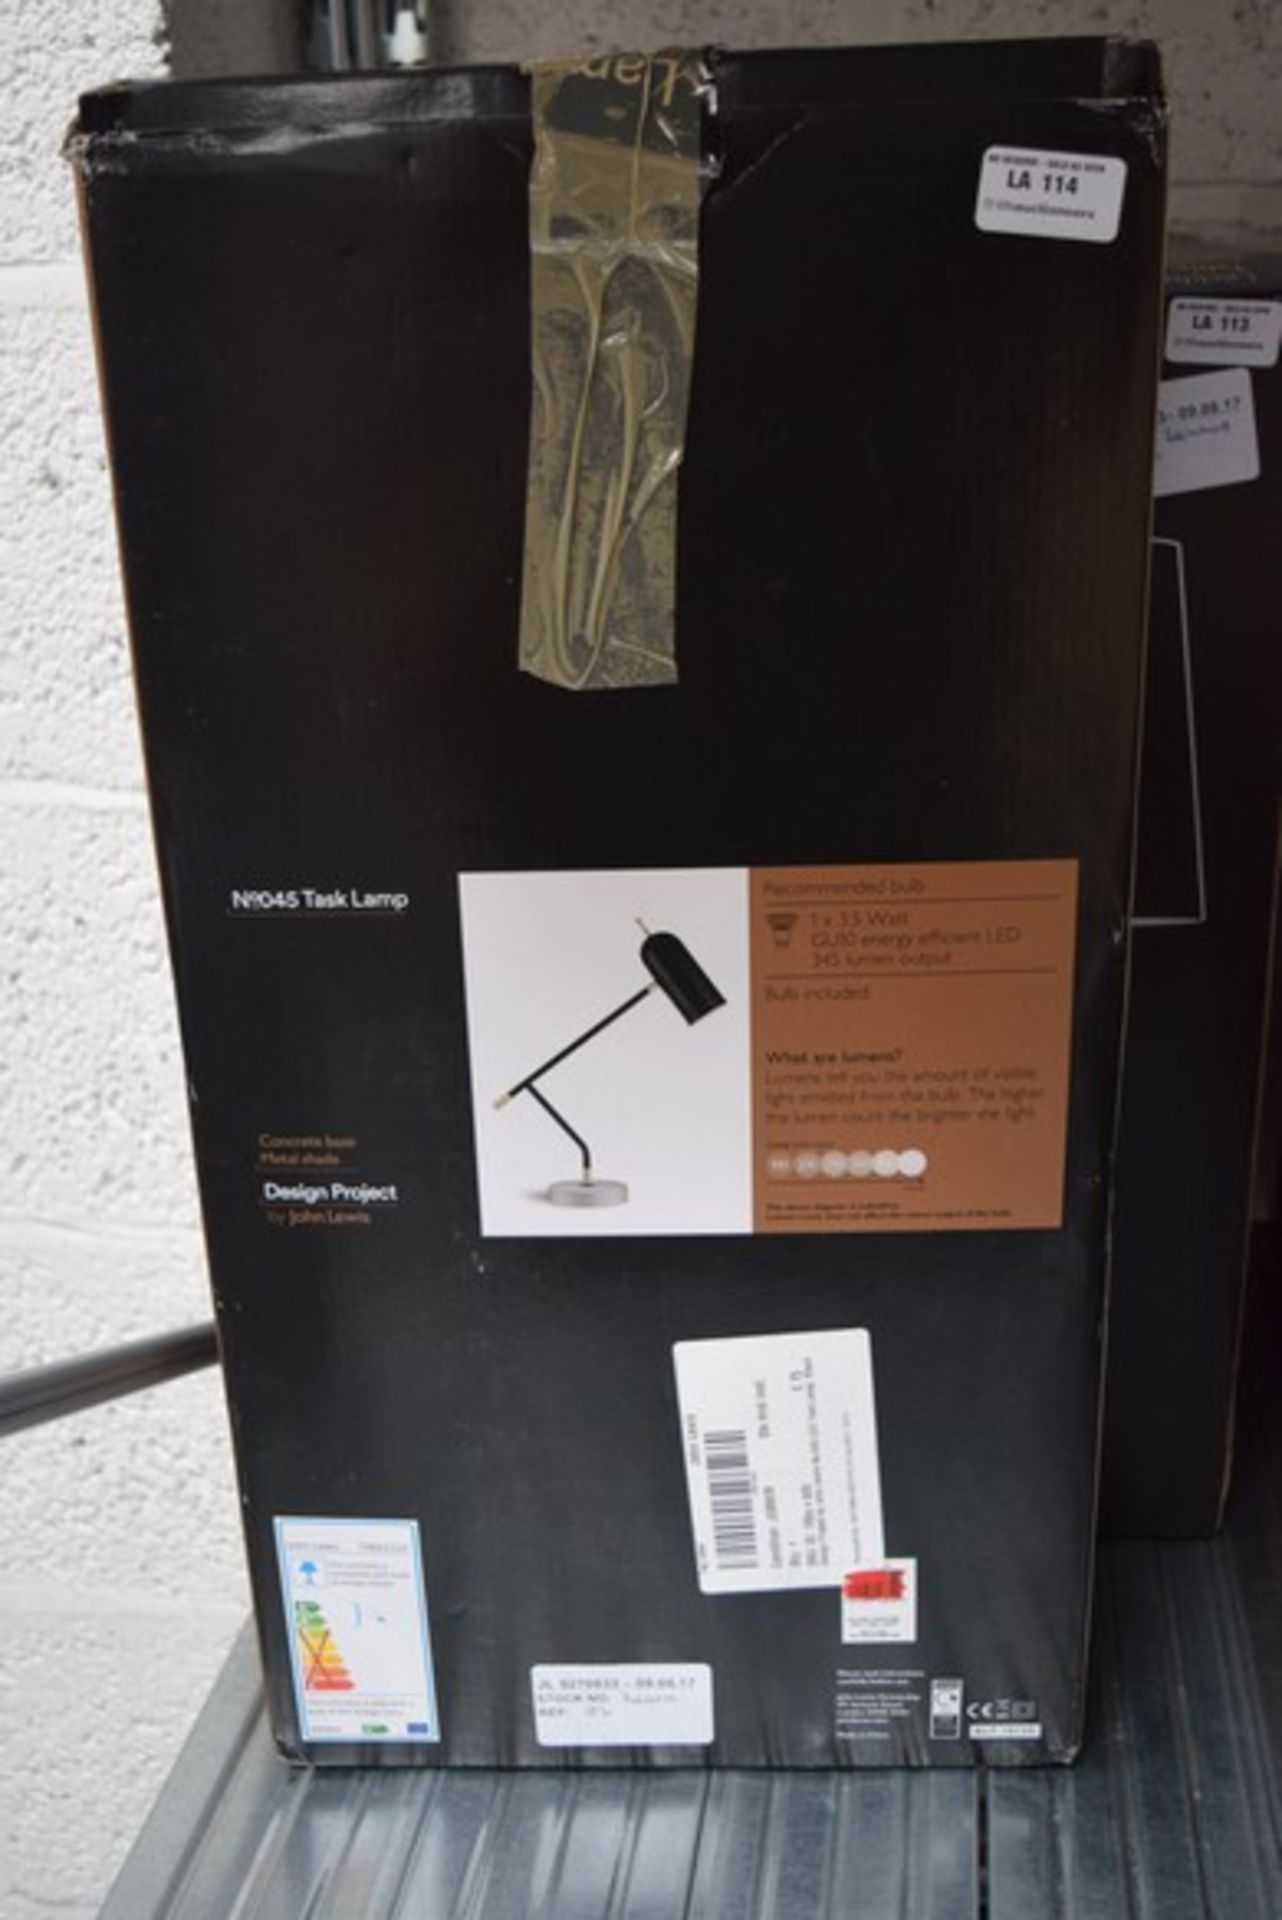 1 x BOXED NO 045 TASK LAMP RRP £75 09.08.17 (70661510) *PLEASE NOTE THAT THE BID PRICE IS MULTIPLIED